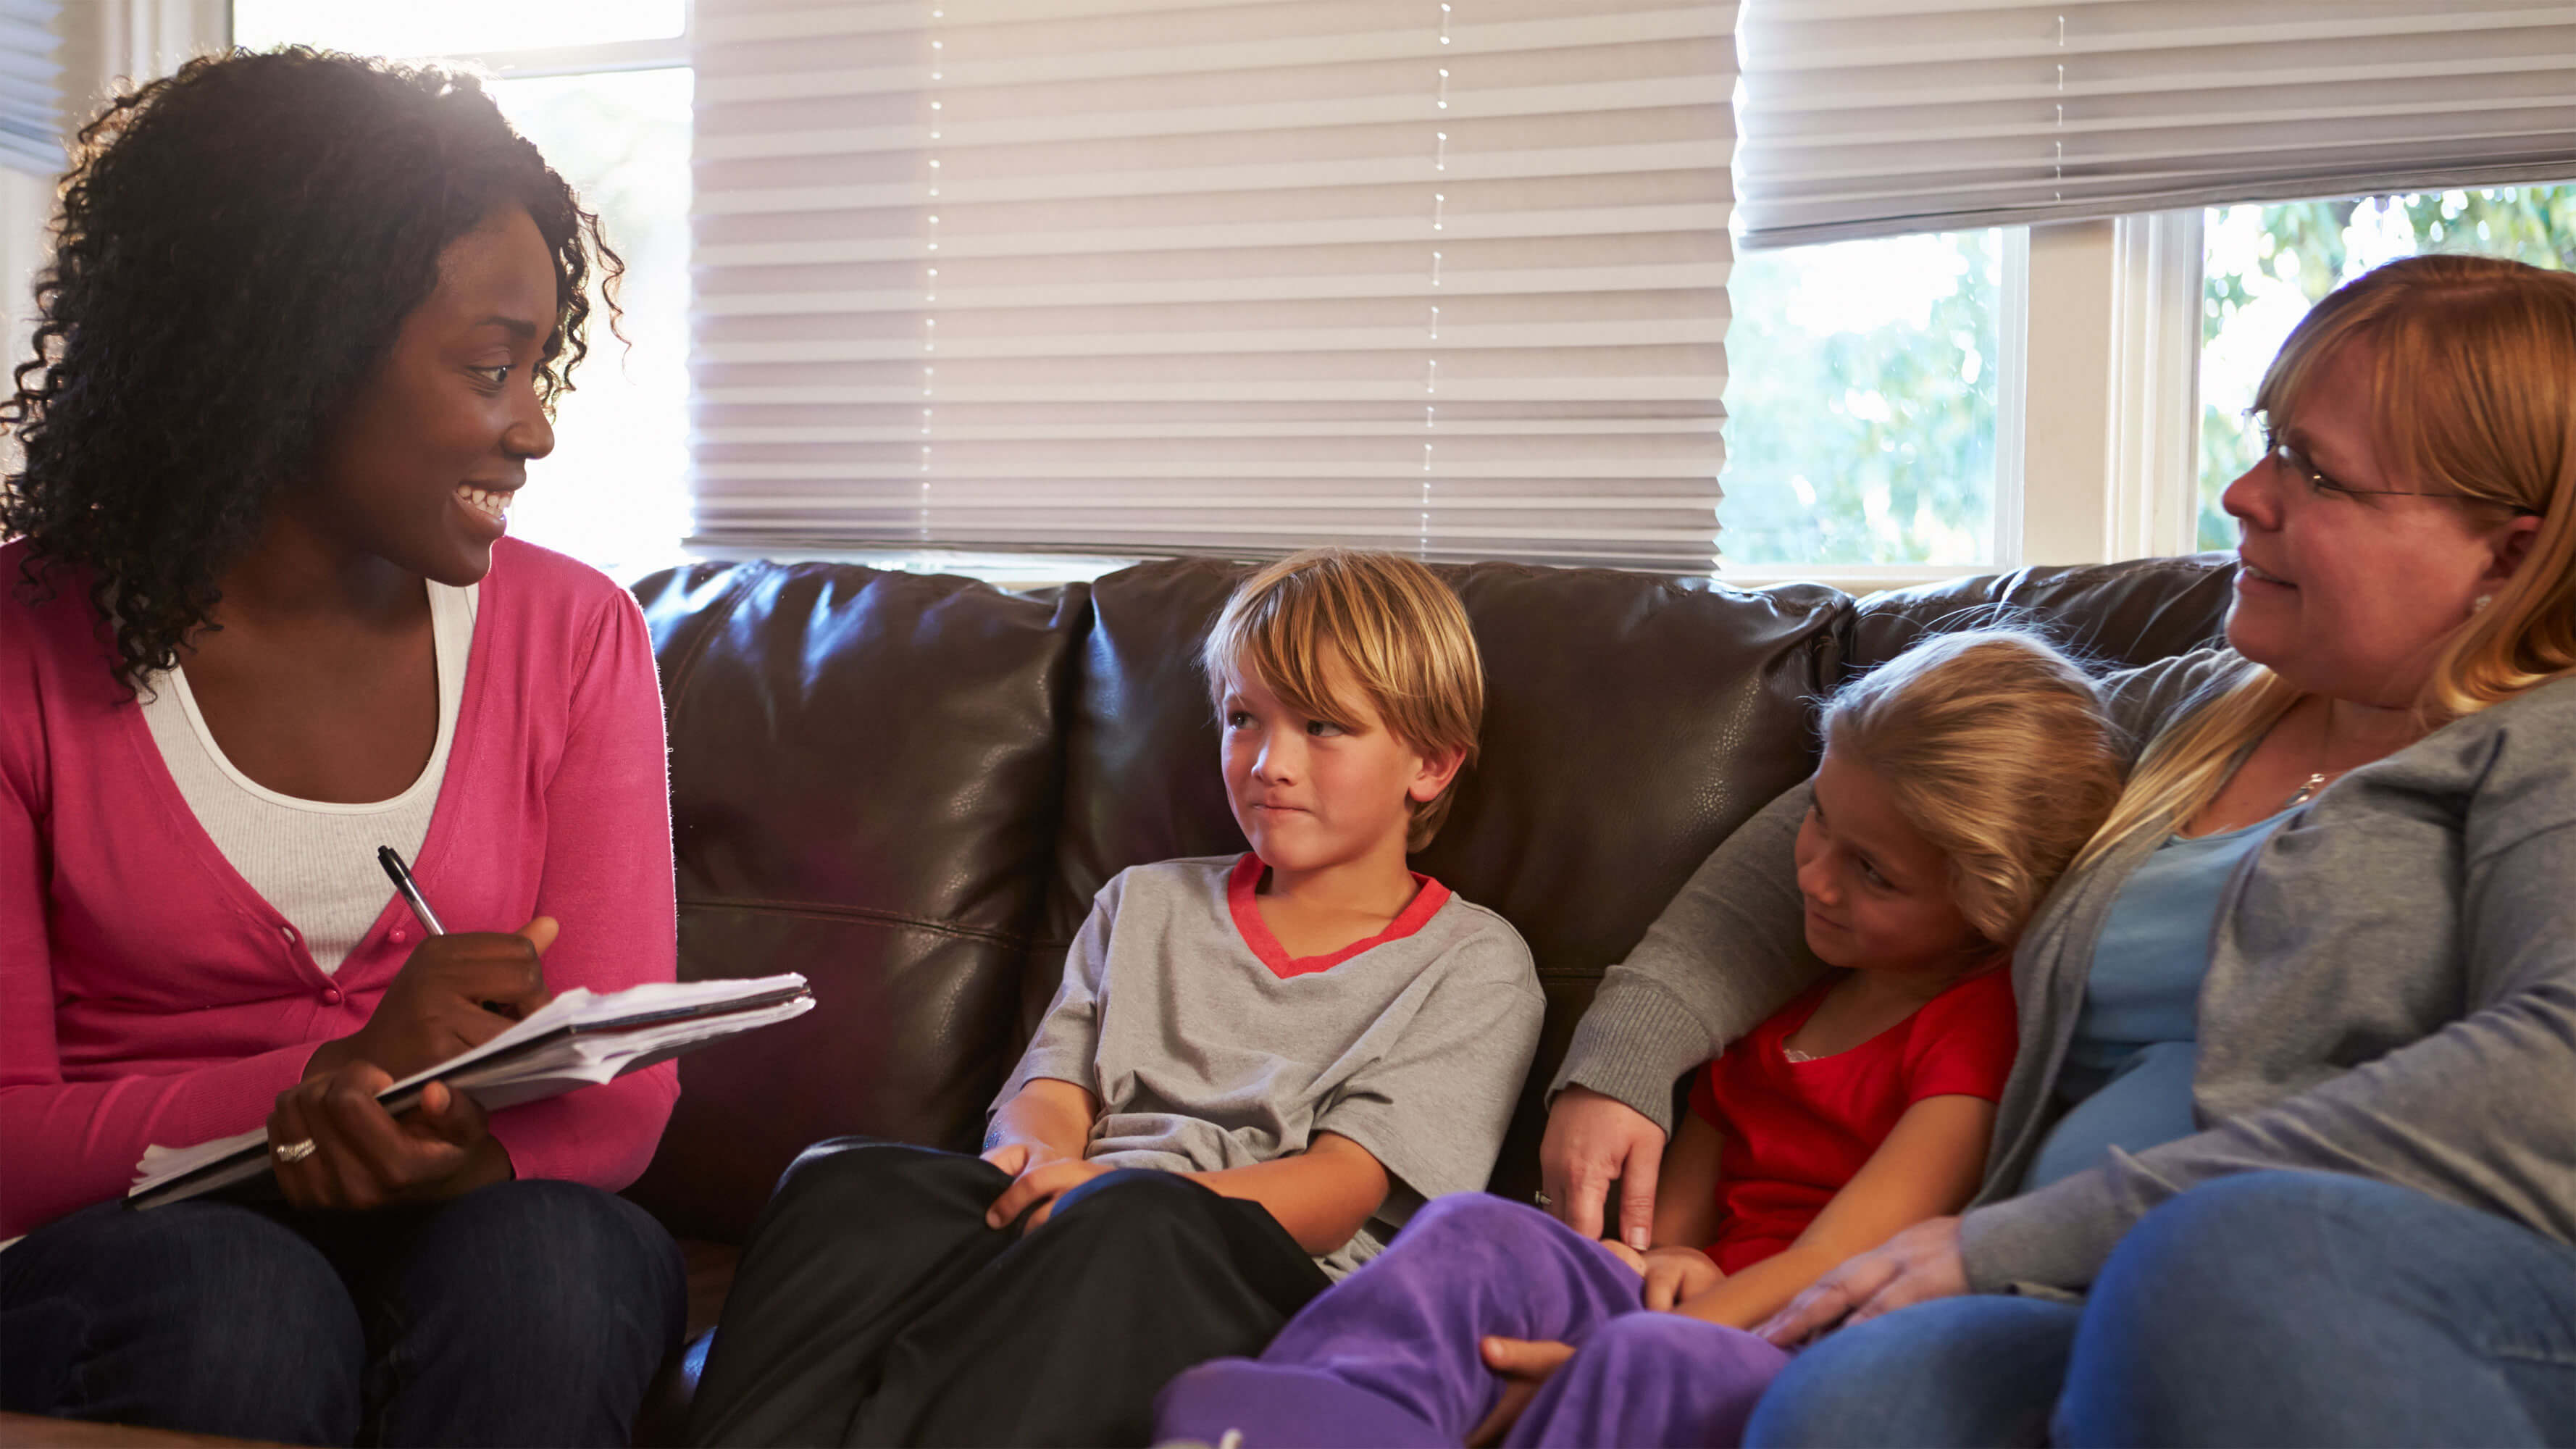 A woman wearing a pink sweater takes notes in a notebook while chatting with a mother and her two young children.